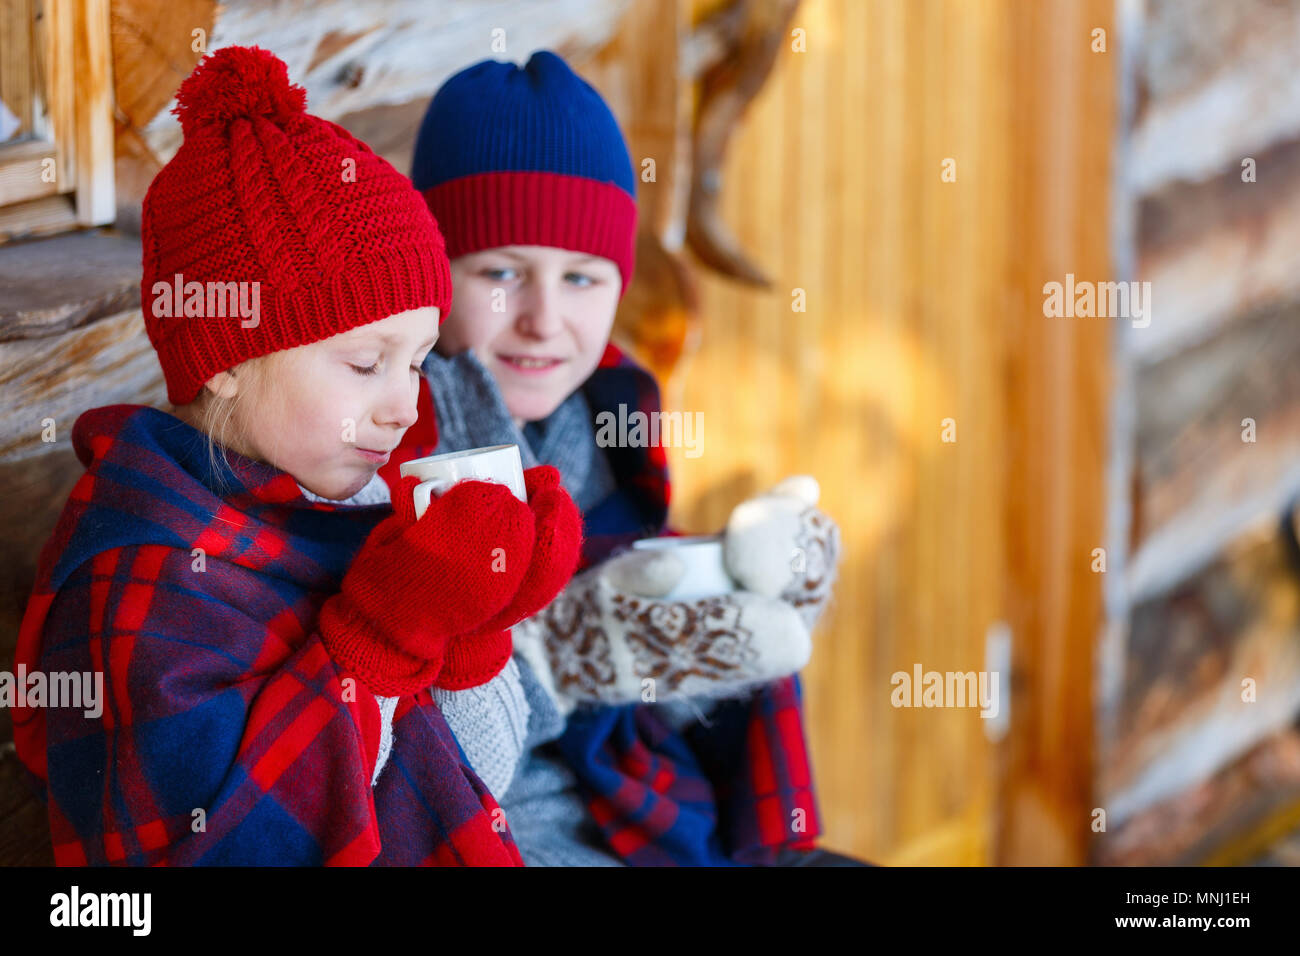 Kids outdoors on beautiful winter day drinking hot chocolate in front of log cabin vacation house Stock Photo